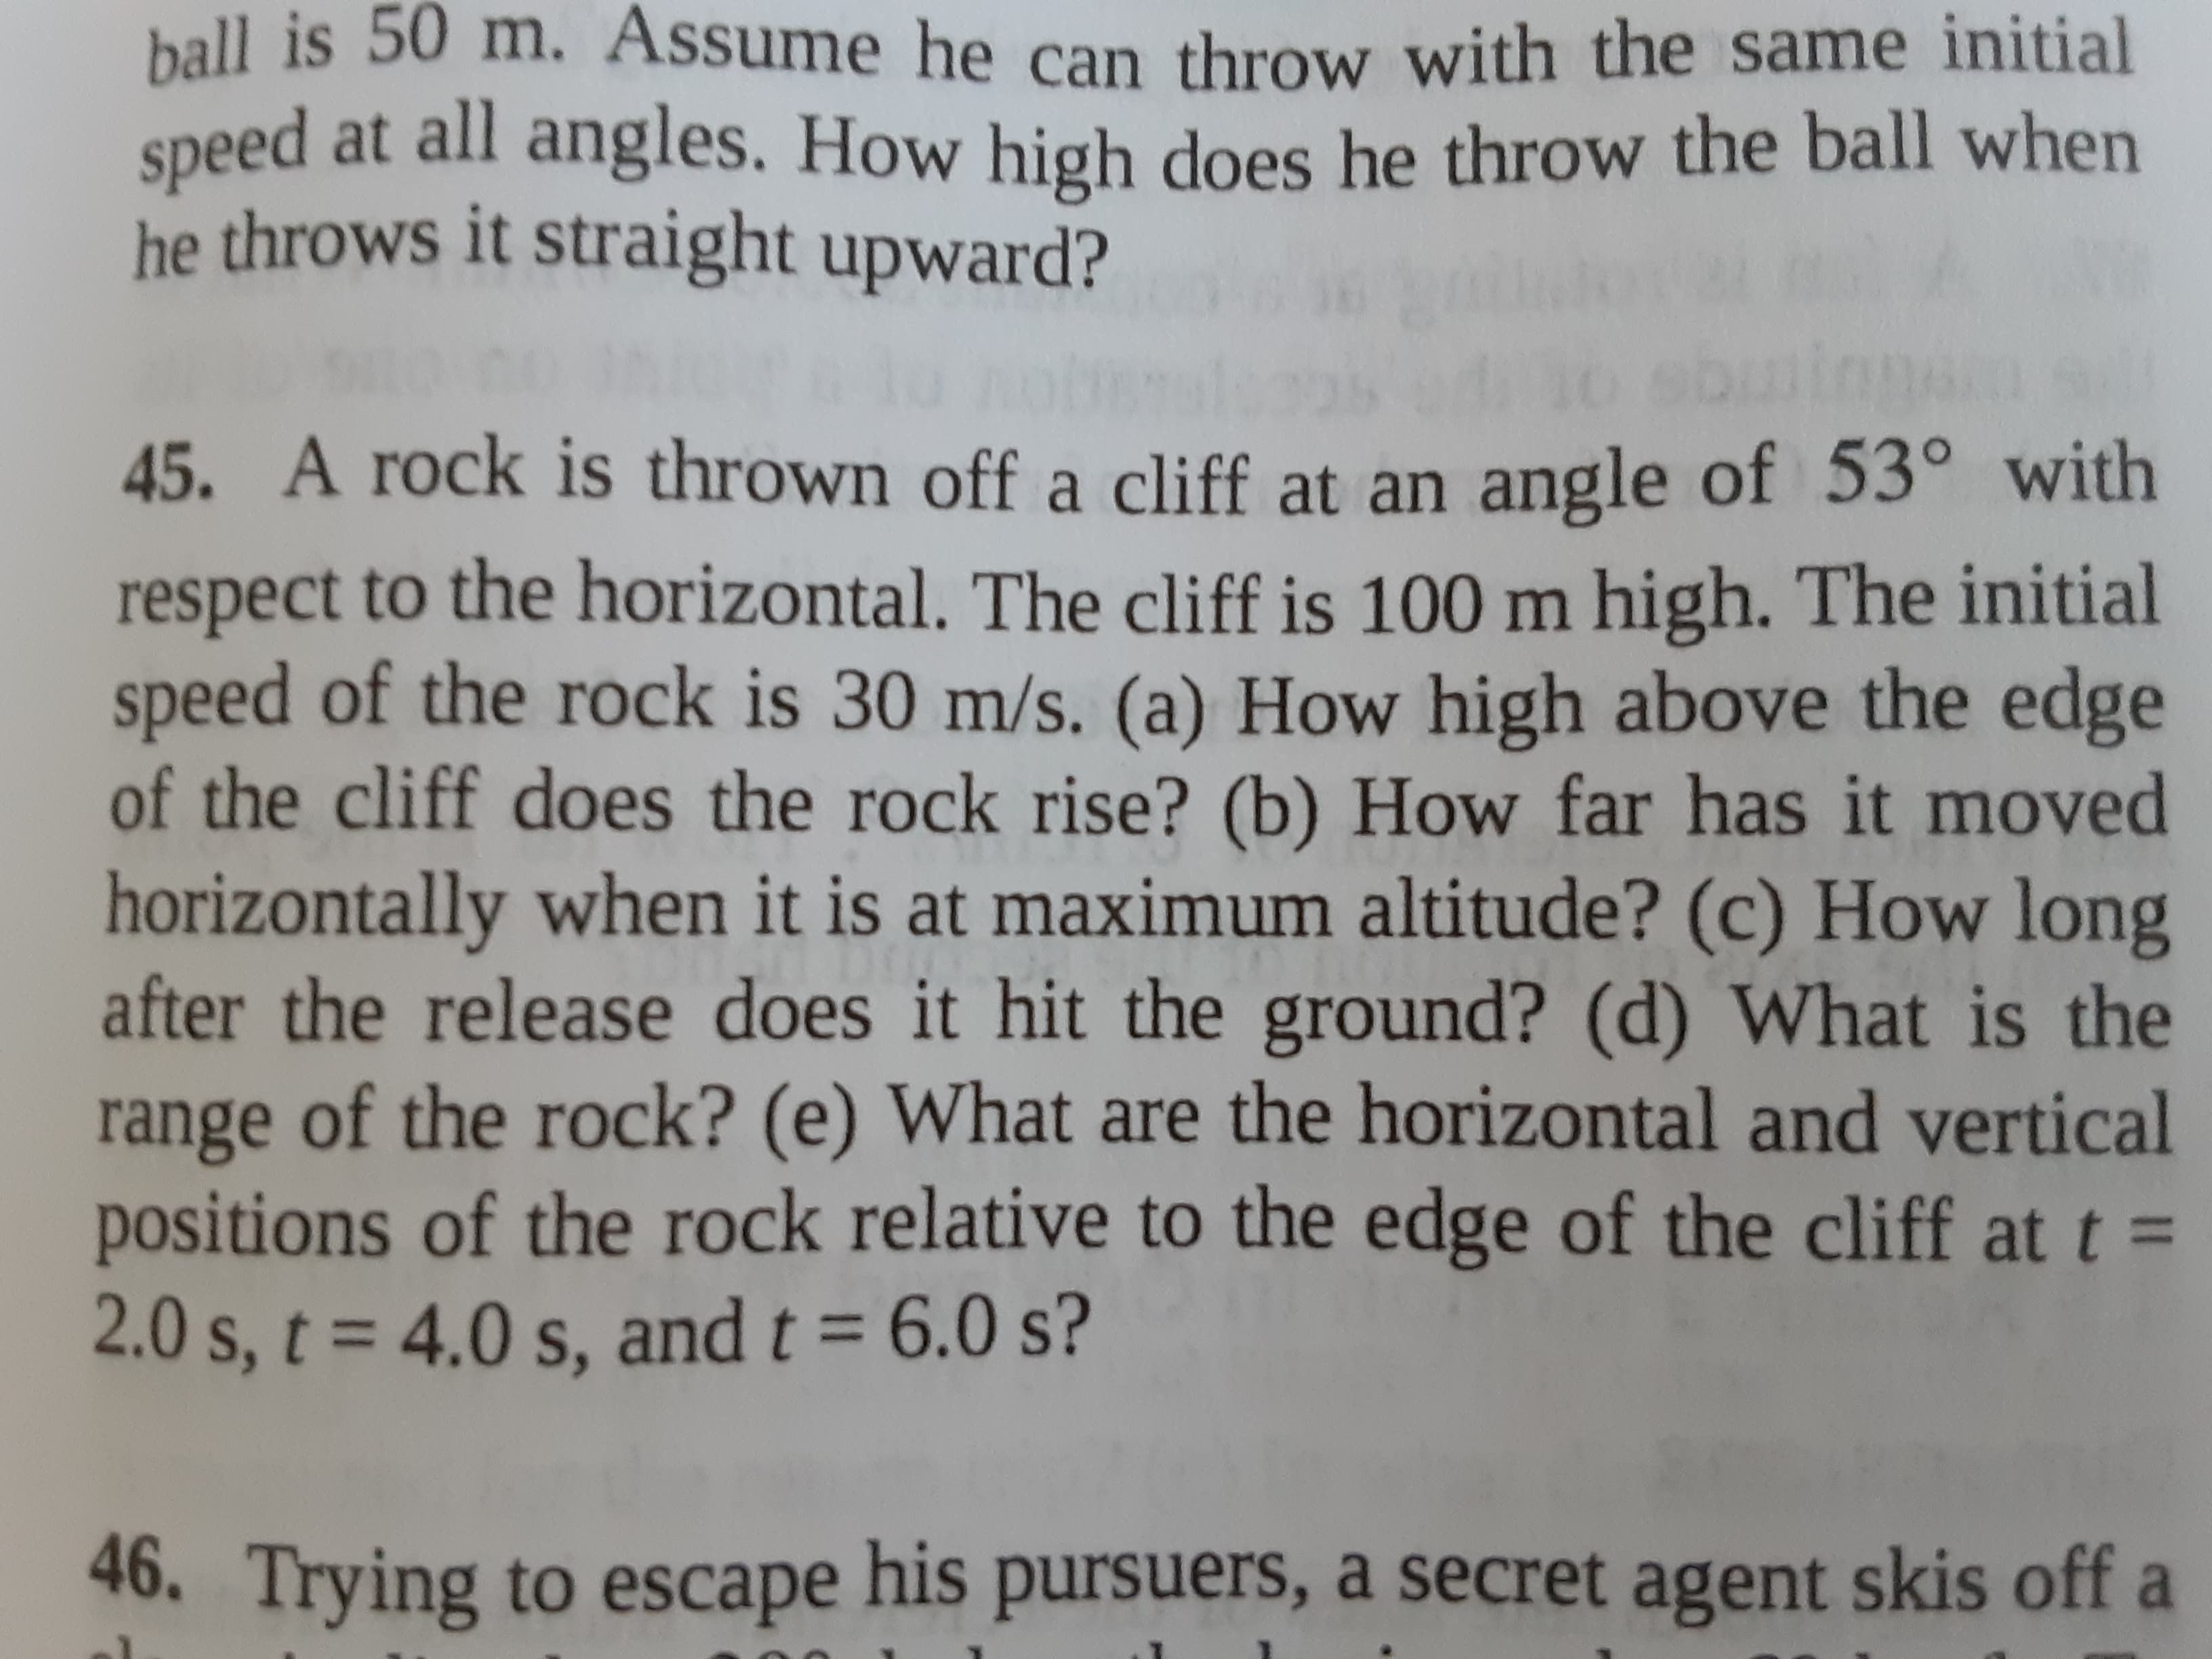 45. A rock is thrown off a cliff at an angle of 53° with
respect to the horizontal. The cliff is 100 m high. The initial
speed of the rock is 30 m/s. (a) How high above the edge
of the cliff does the rock rise? (b) How far has it moved
horizontally when it is at maximum altitude? (c) How long
after the release does it hit the ground? (d) What is the
range of the rock? (e) What are the horizontal and vertical
positions of the rock relative to the edge of the cliff at t =
2.0s.t%3D4.0s, and t = 6.0 s?
= 4.0 s. and t = 6,0 s?
